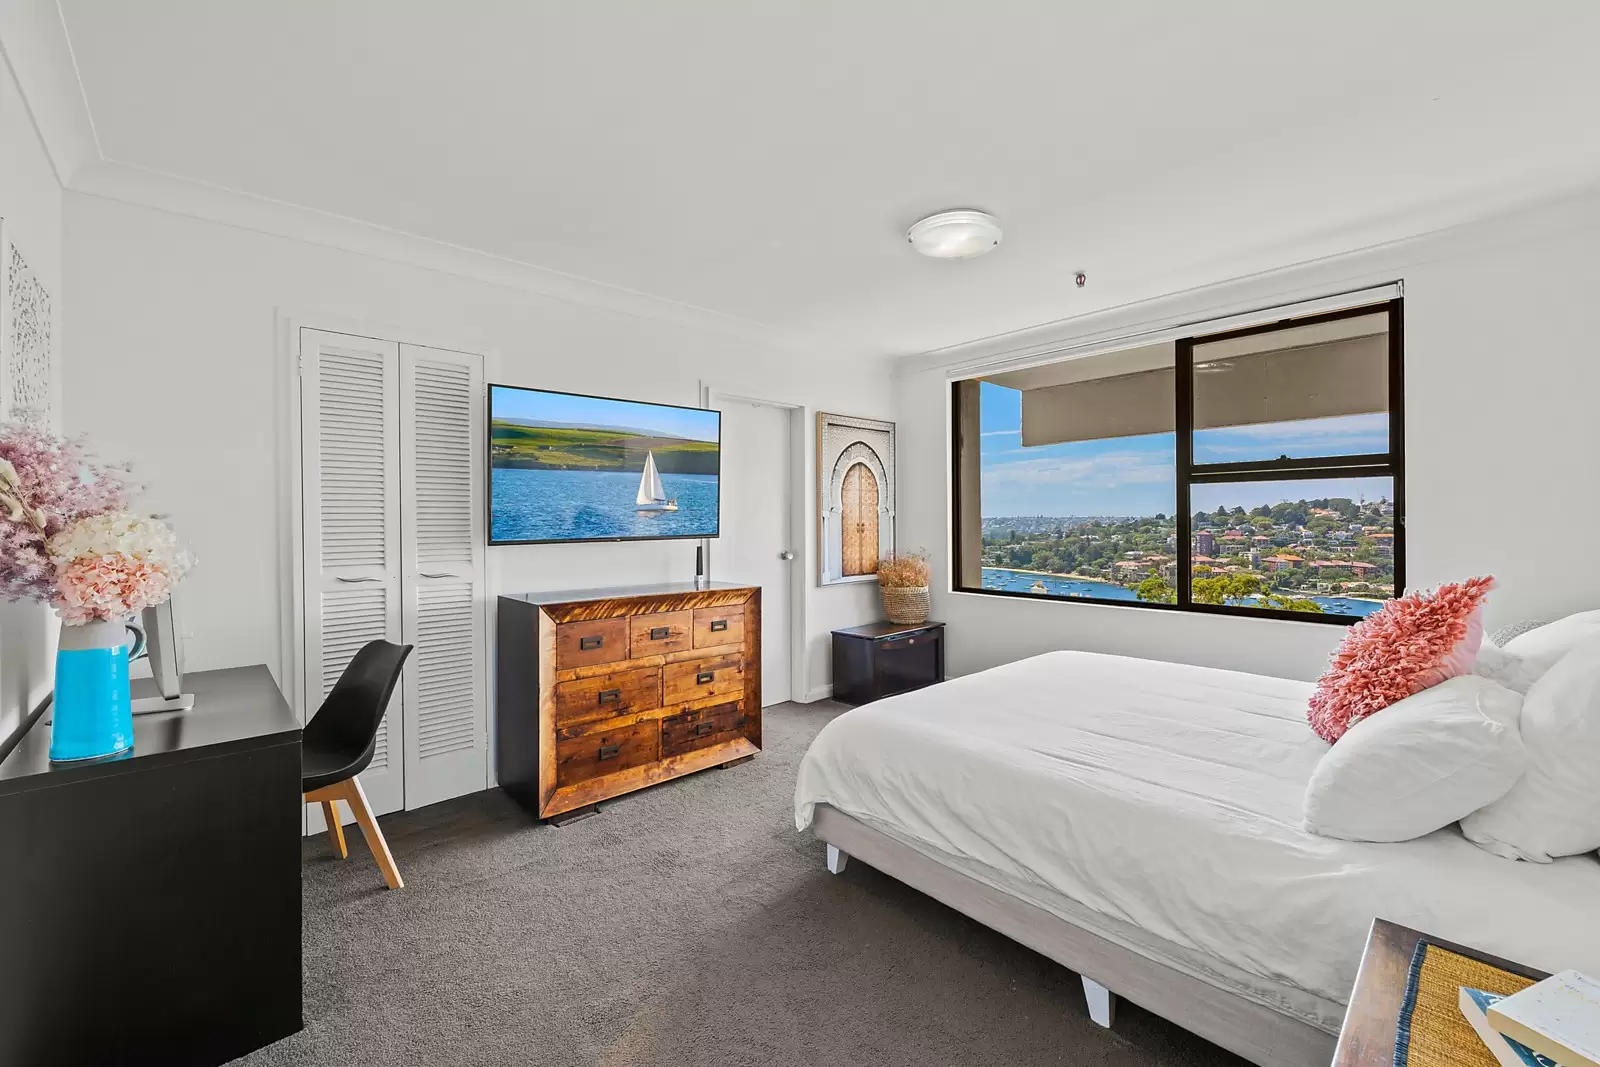 Photo #13: 23/60 Darling Point Road, Darling Point - Sold by Sydney Sotheby's International Realty